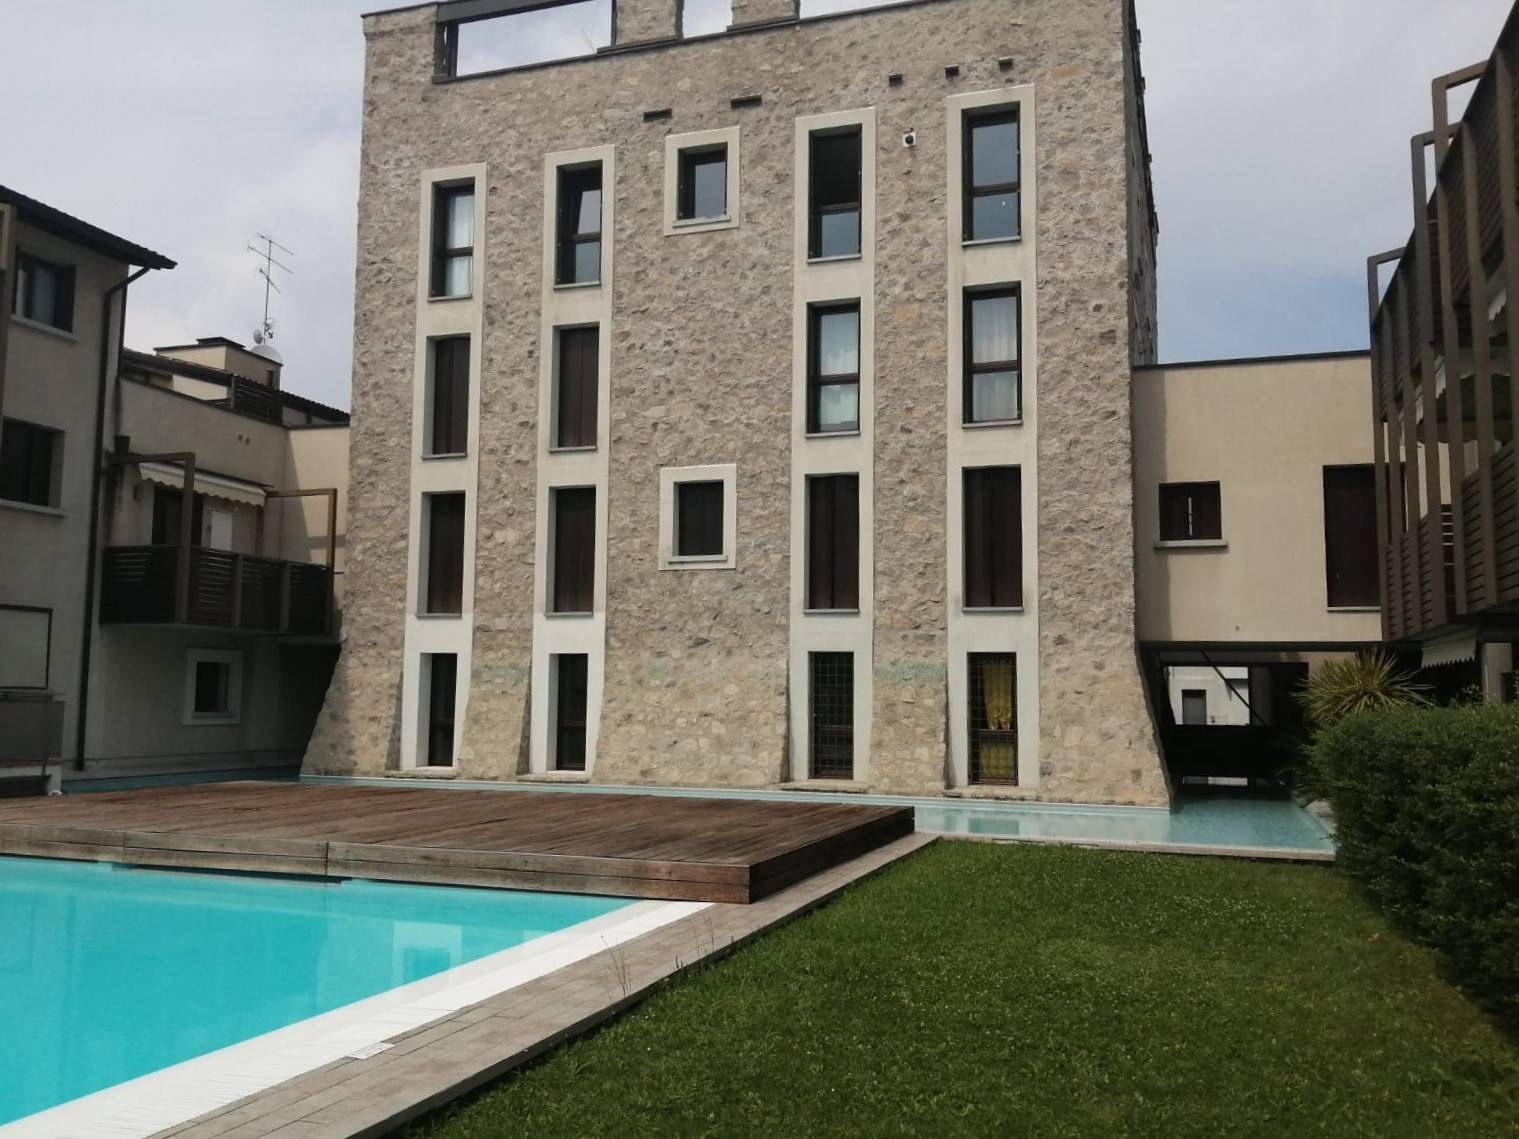 MONIGA DEL GARDA, Apartment for sale of 68 Sq. mt., Excellent Condition, Energetic class: F, placed at 1°, composed by: 3 Rooms, Show cooking, , 2 Bedrooms, 1 Bathroom, Single Box, Price: € 189,000